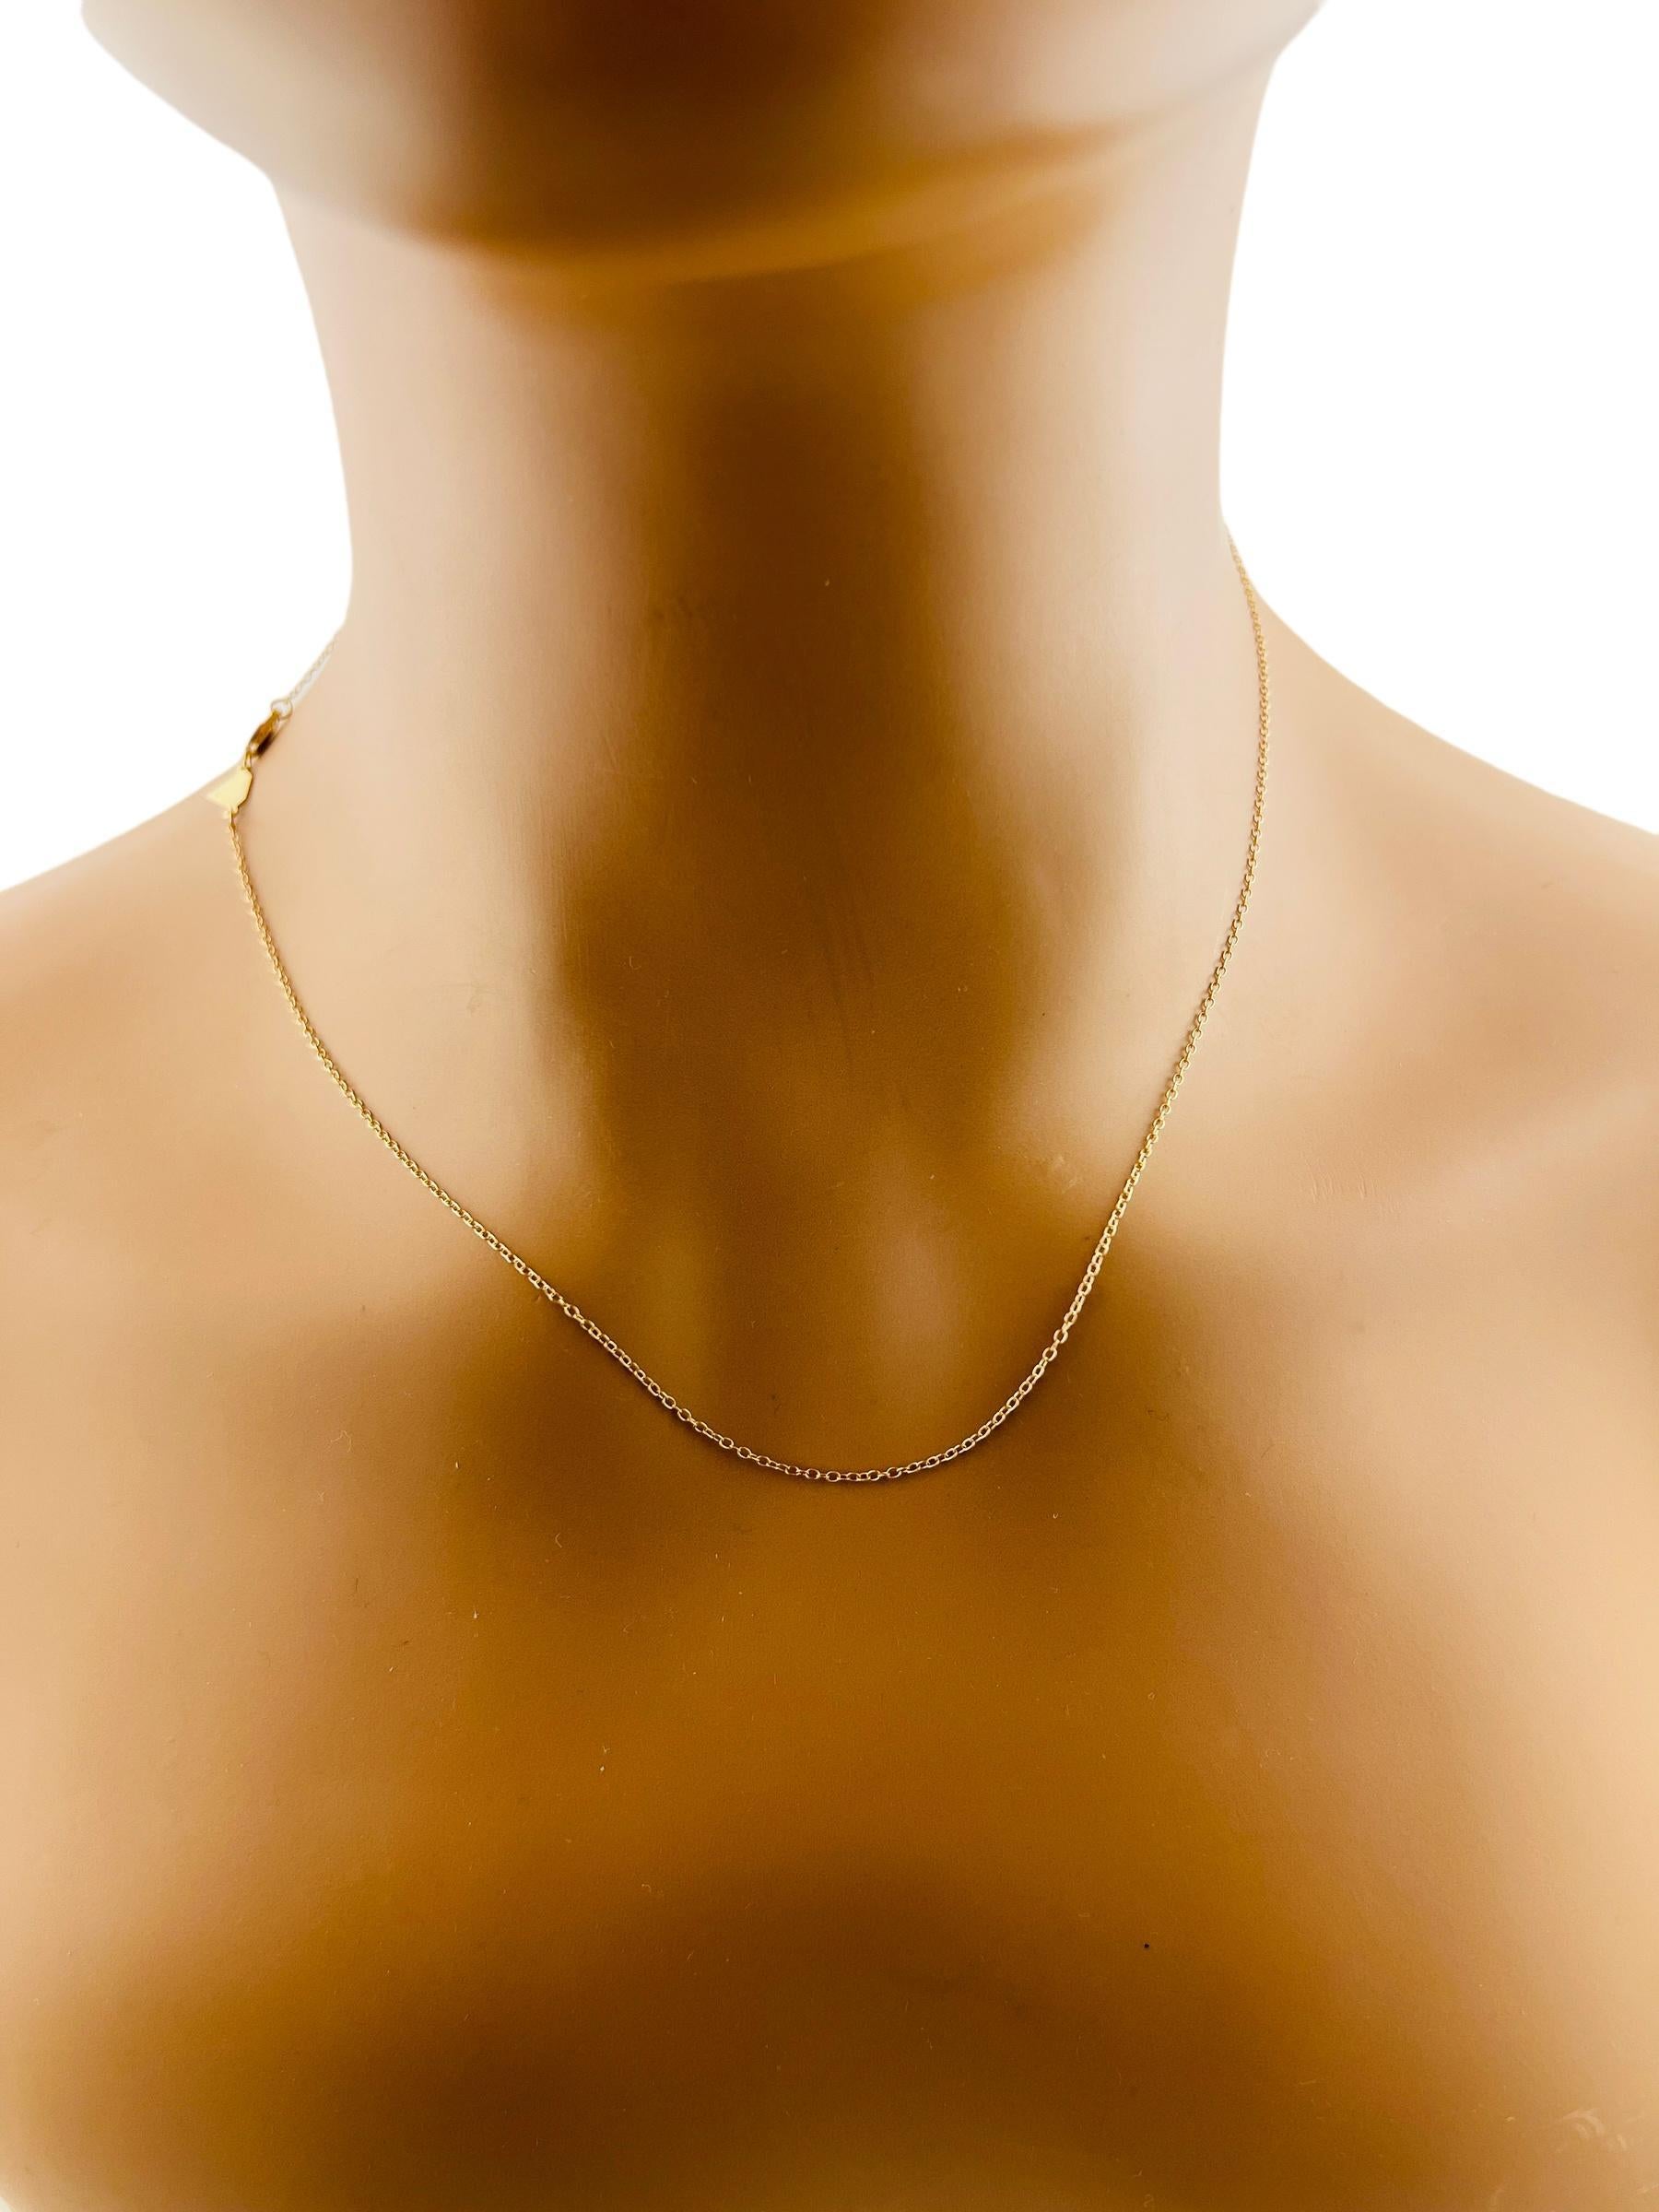 Alison Lou 14K Yellow Gold Adjustable Chain

This link chain is set in 14K yellow gold. 

18